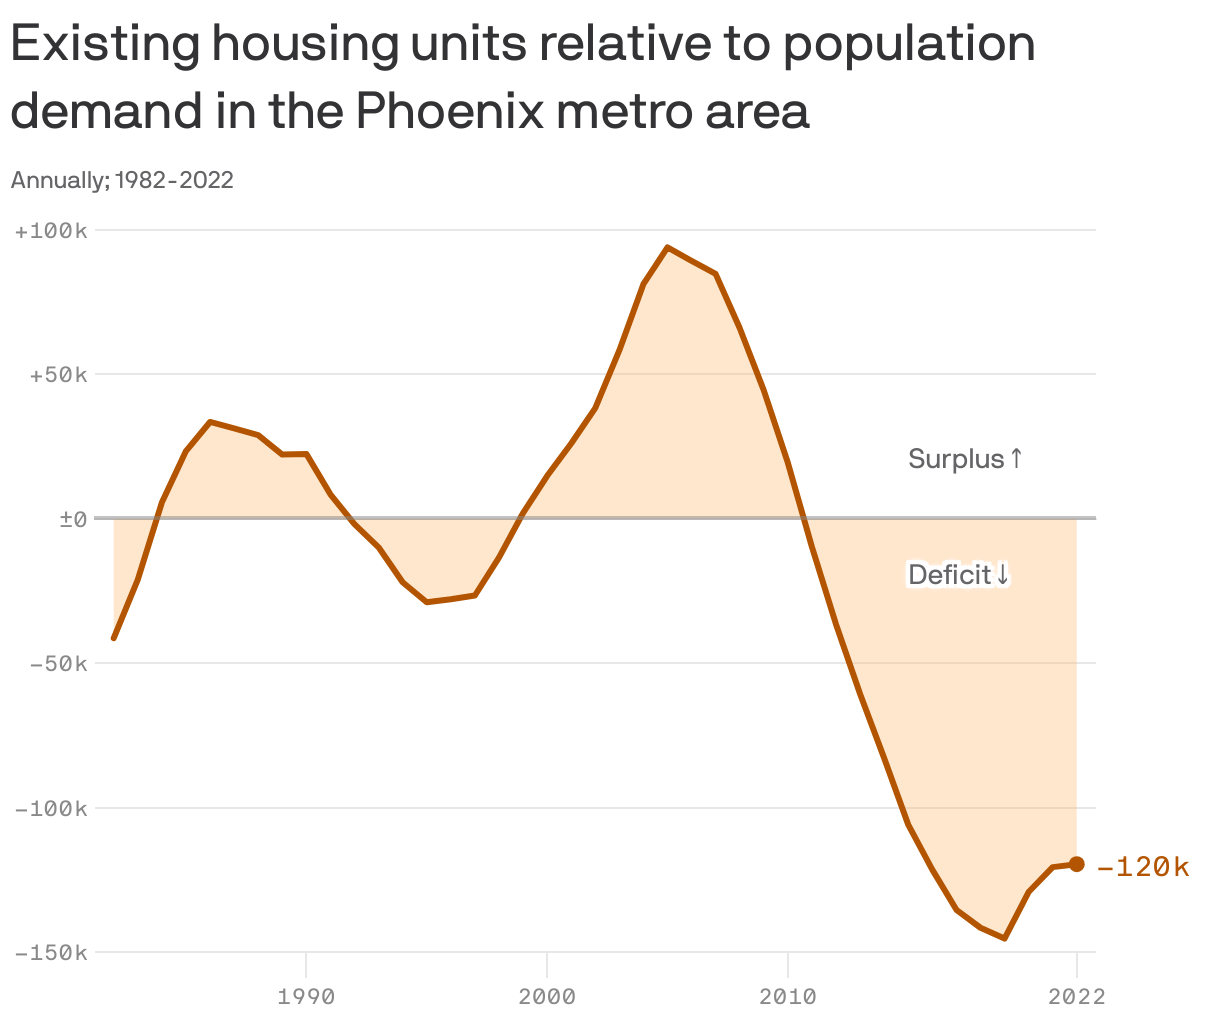 Existing housing units relative to population demand in the Phoenix metro area